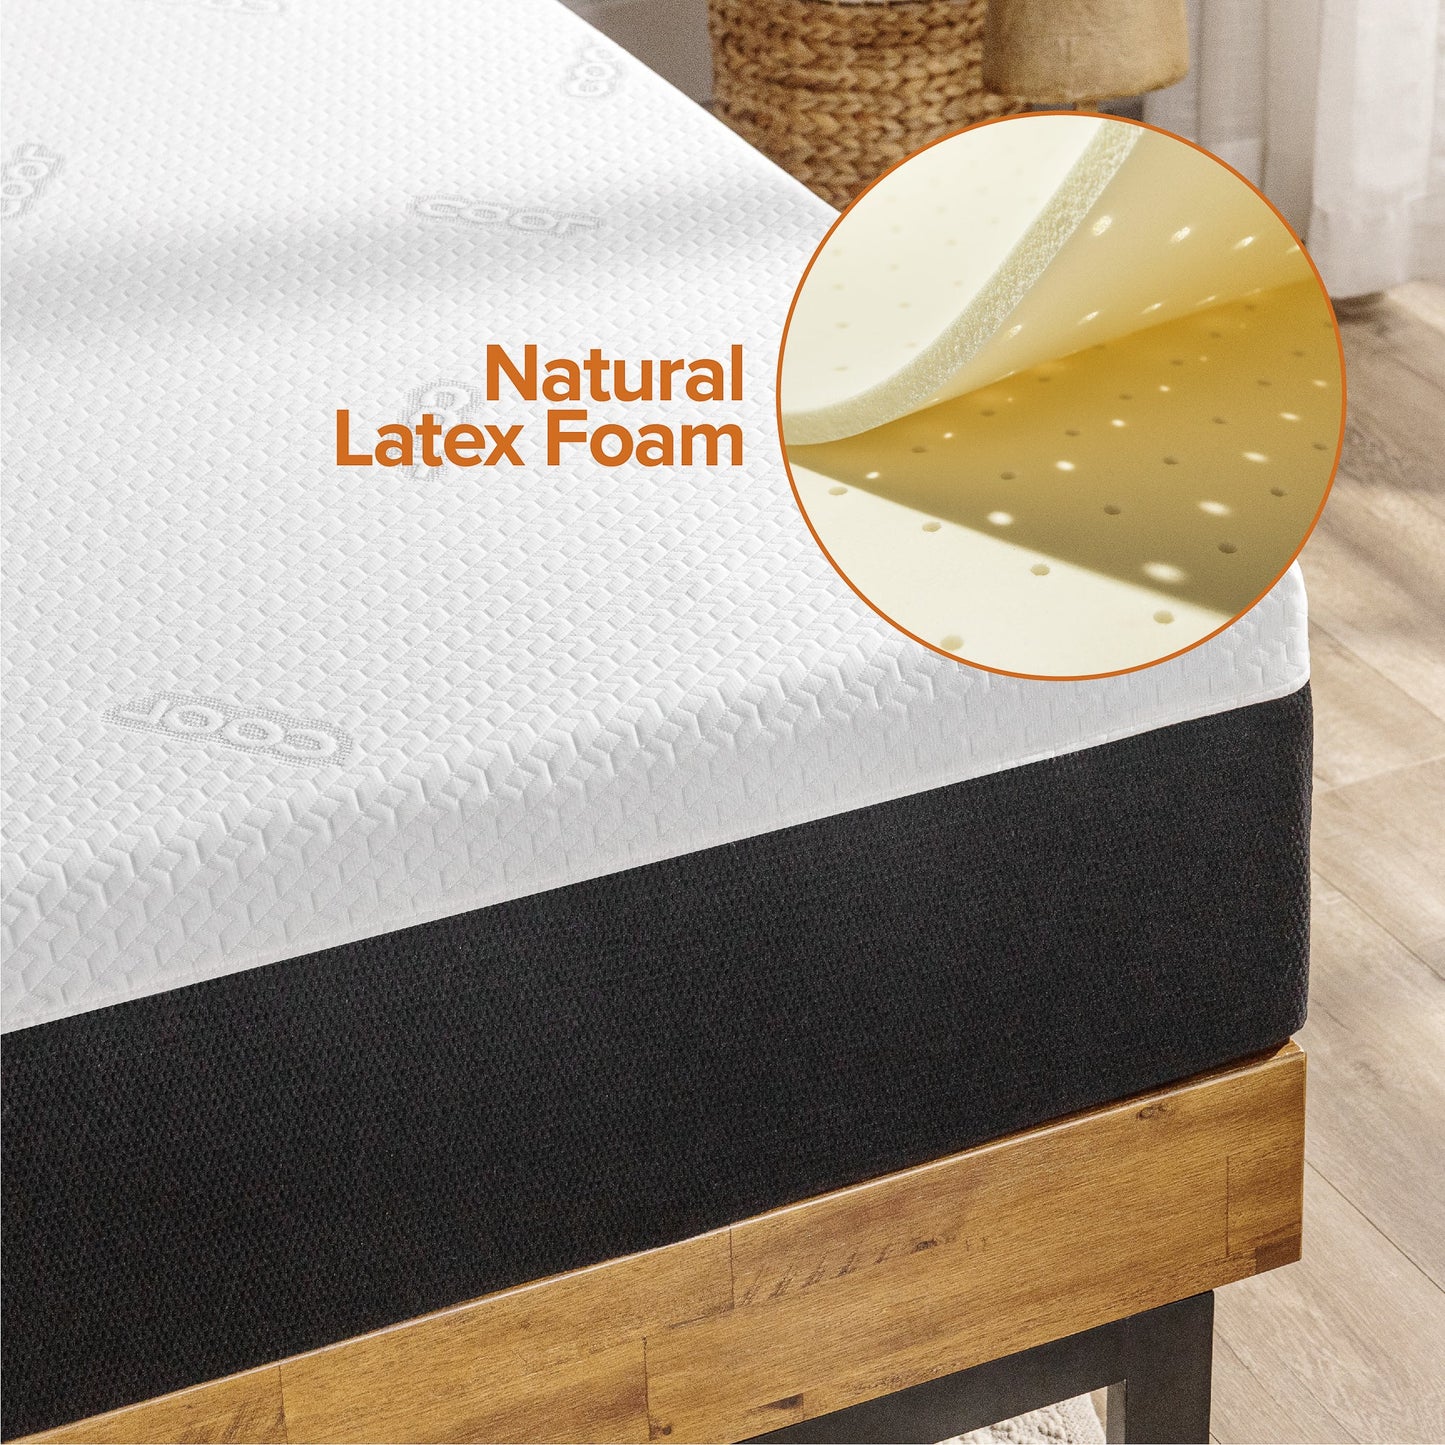 Tilam UltraCool Series iCoil 2.0 Natural Latex & Memory Foam Smooth Top Mattress With Edge Support (Cool Fabric) 14" [Clearance]